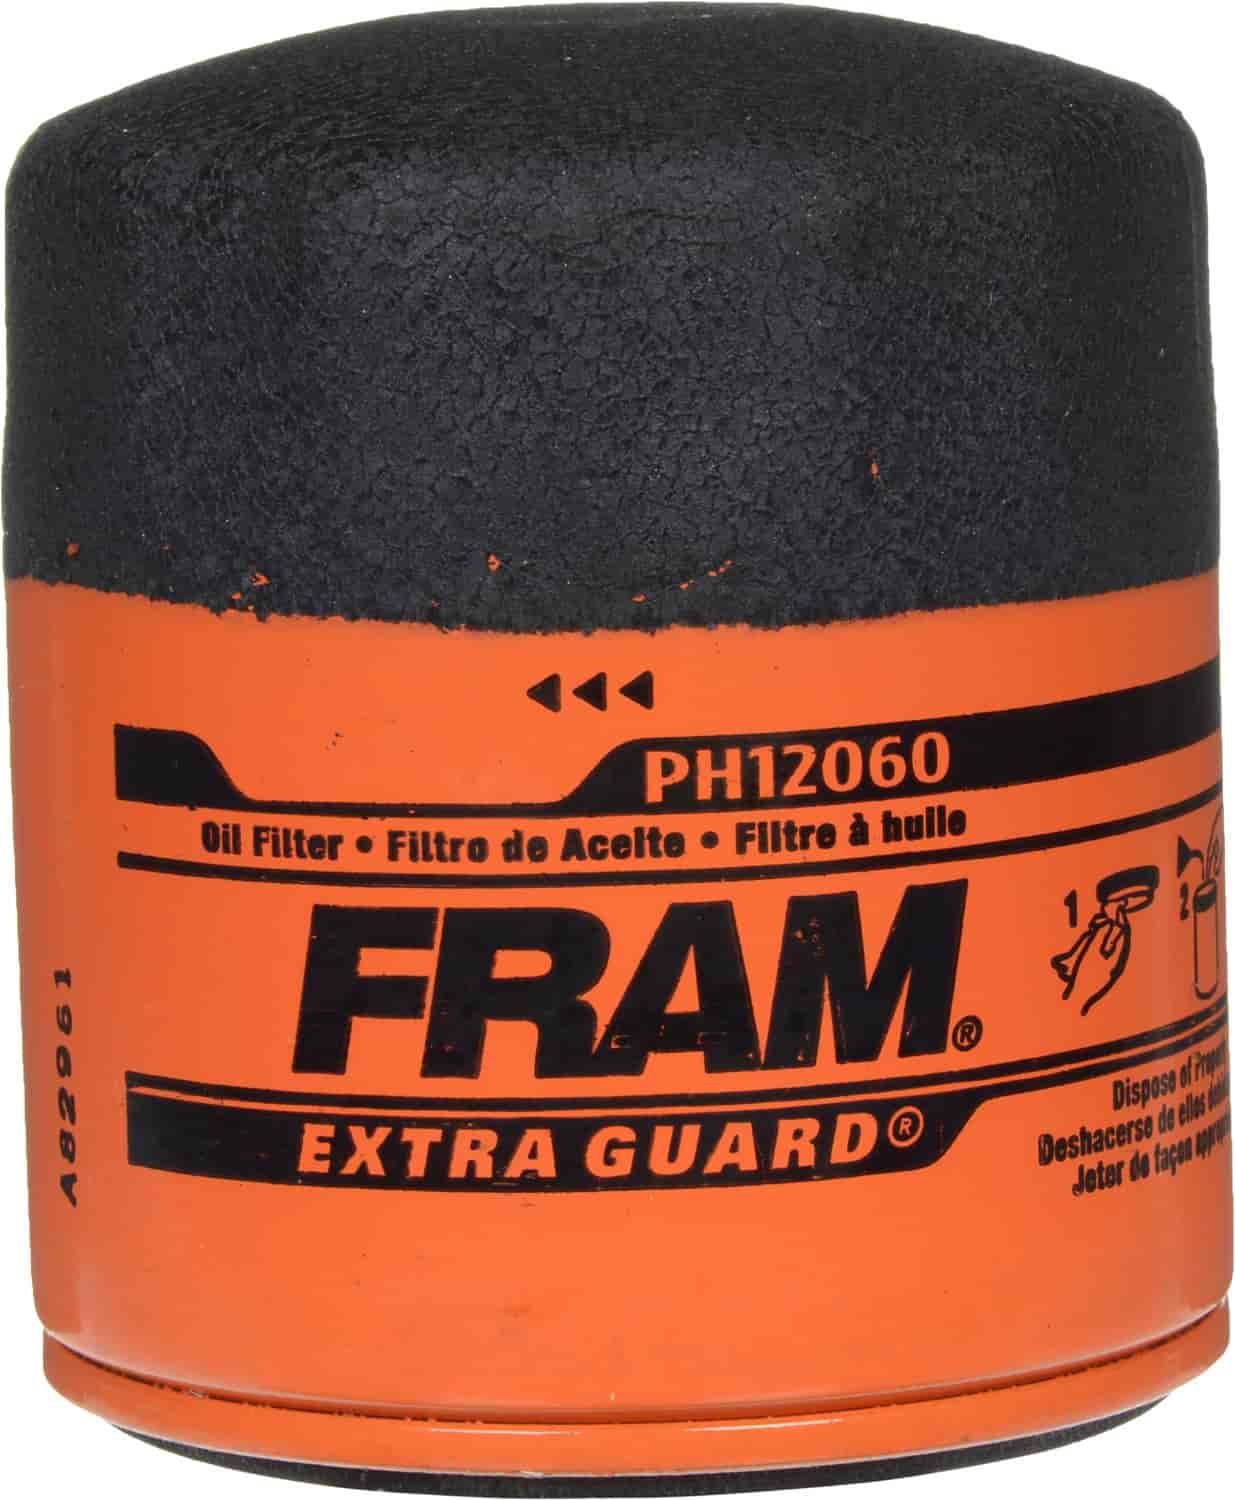 Extra Guard Spin-On Oil Filter for Select Buick, Cadillac, Chevrolet, GMC